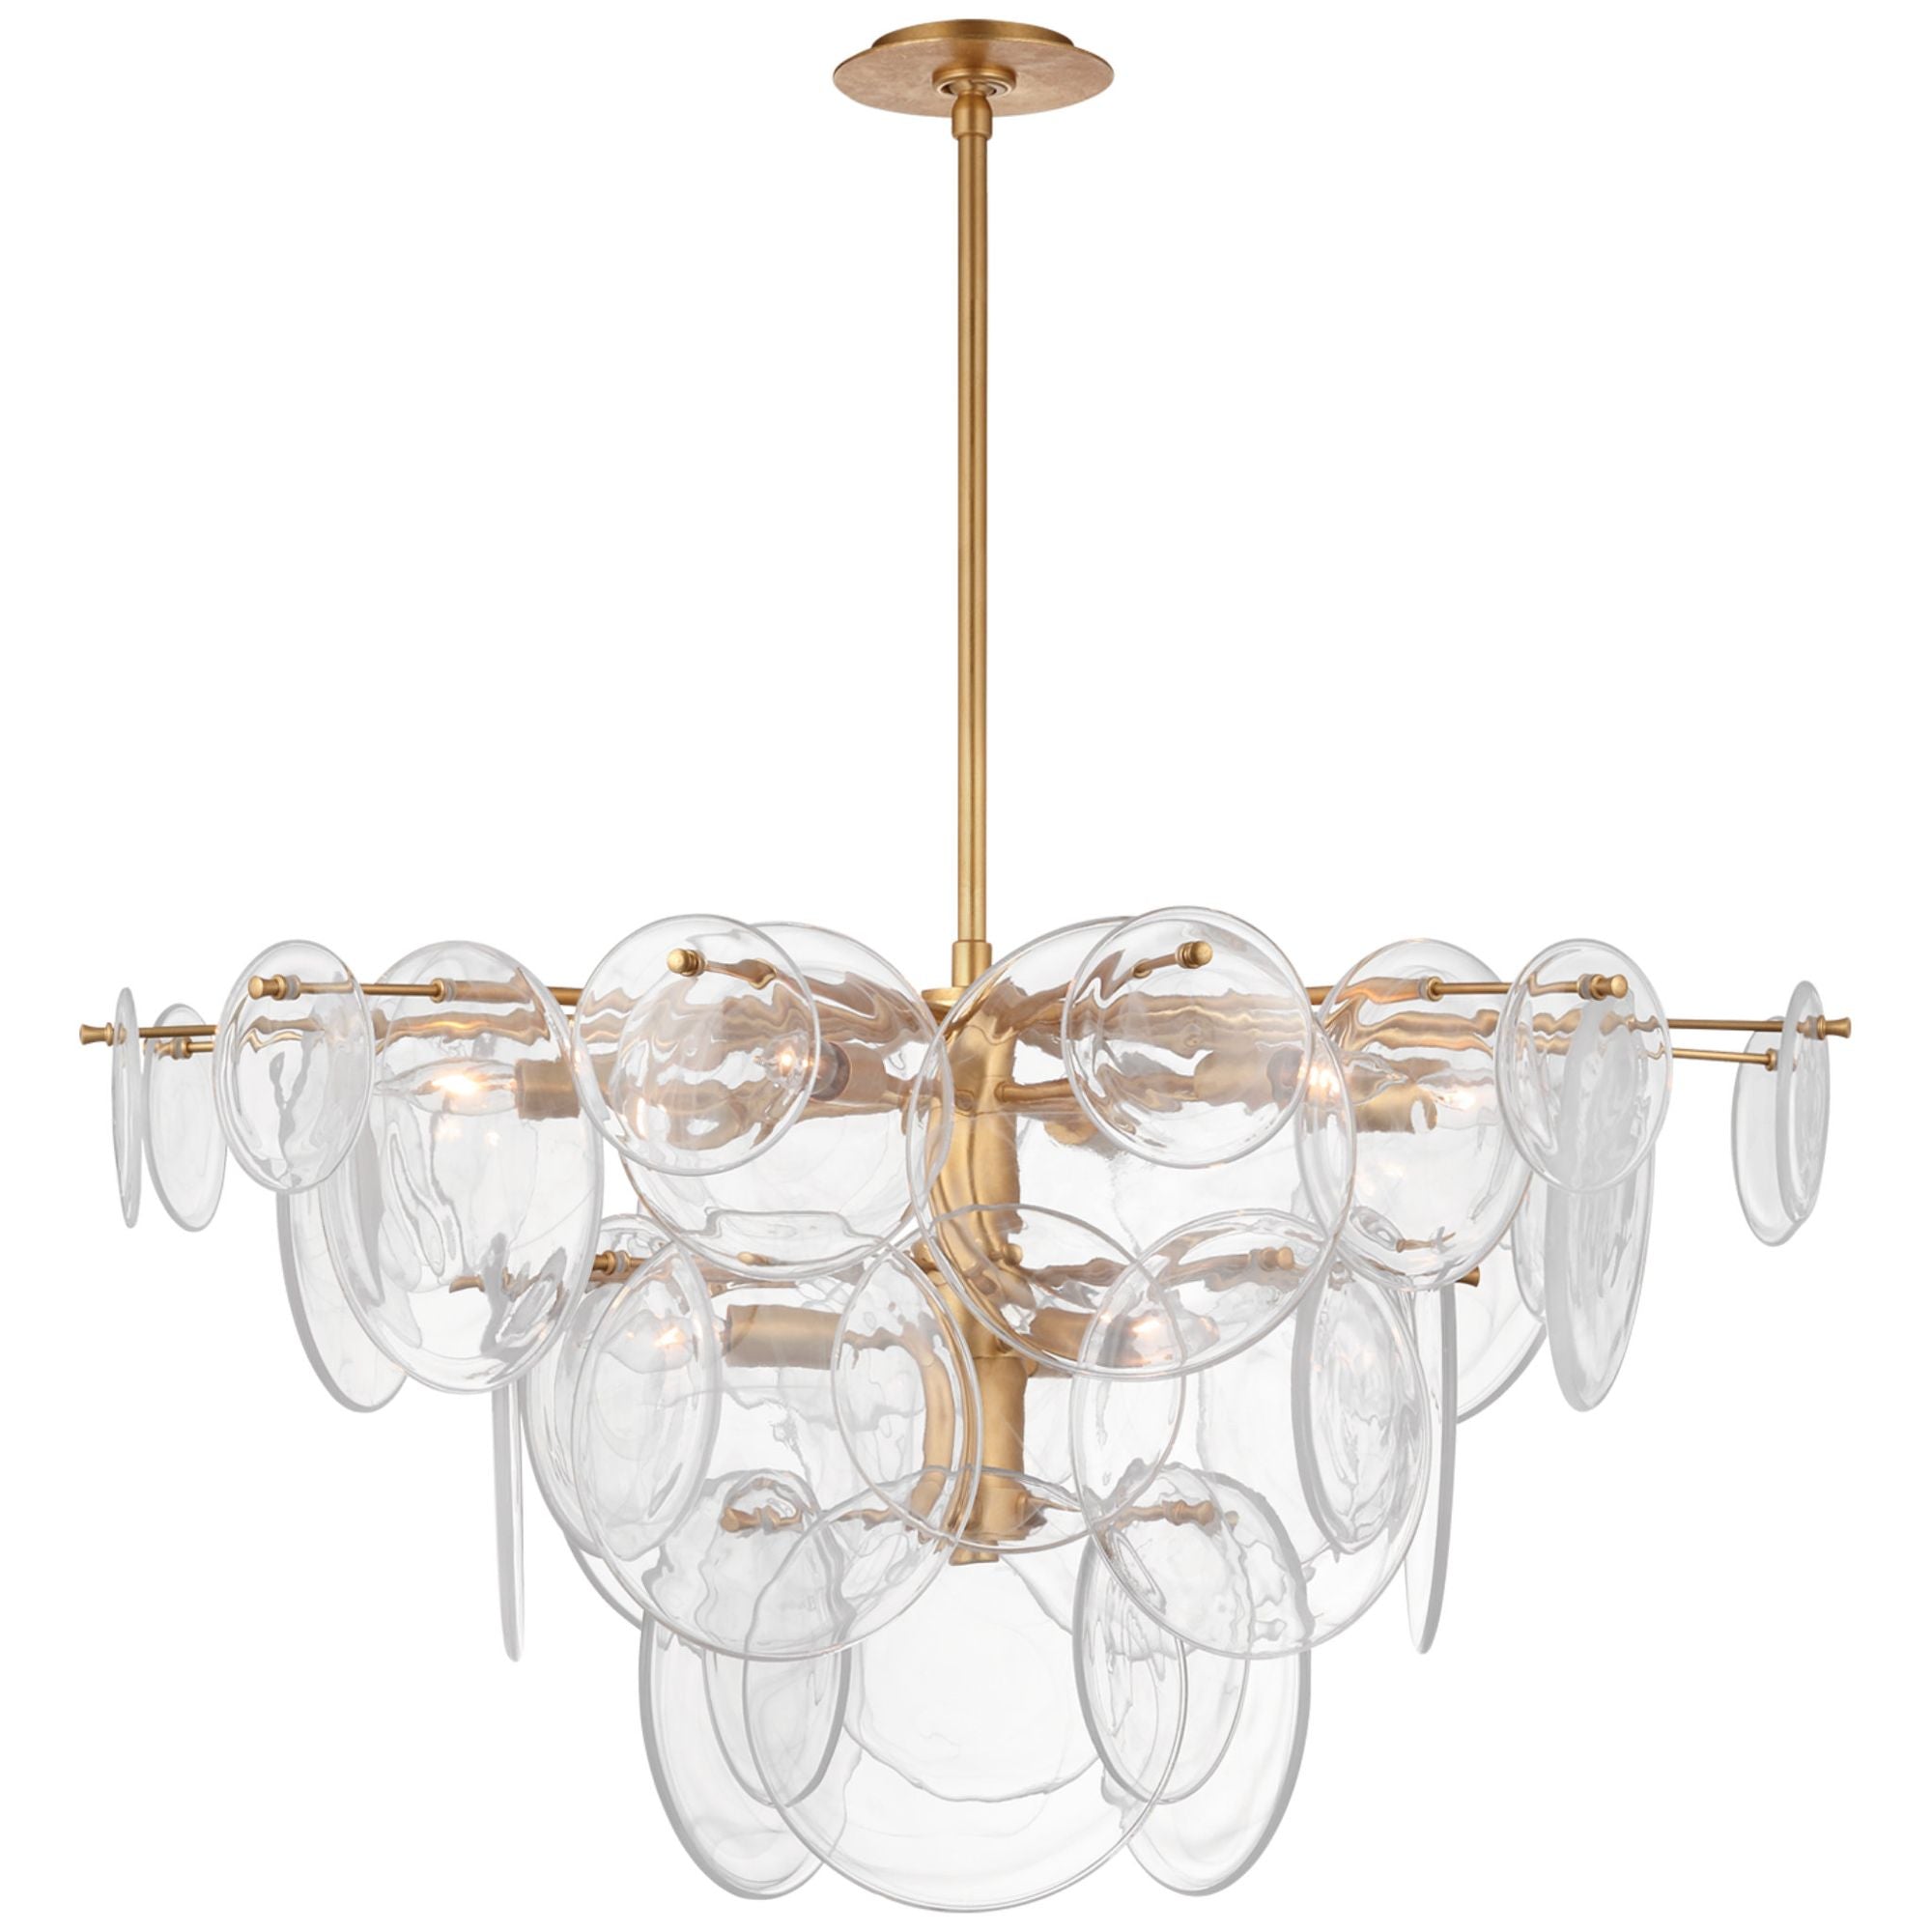 AERIN Loire Large Chandelier in Gild with Clear Strie Glass